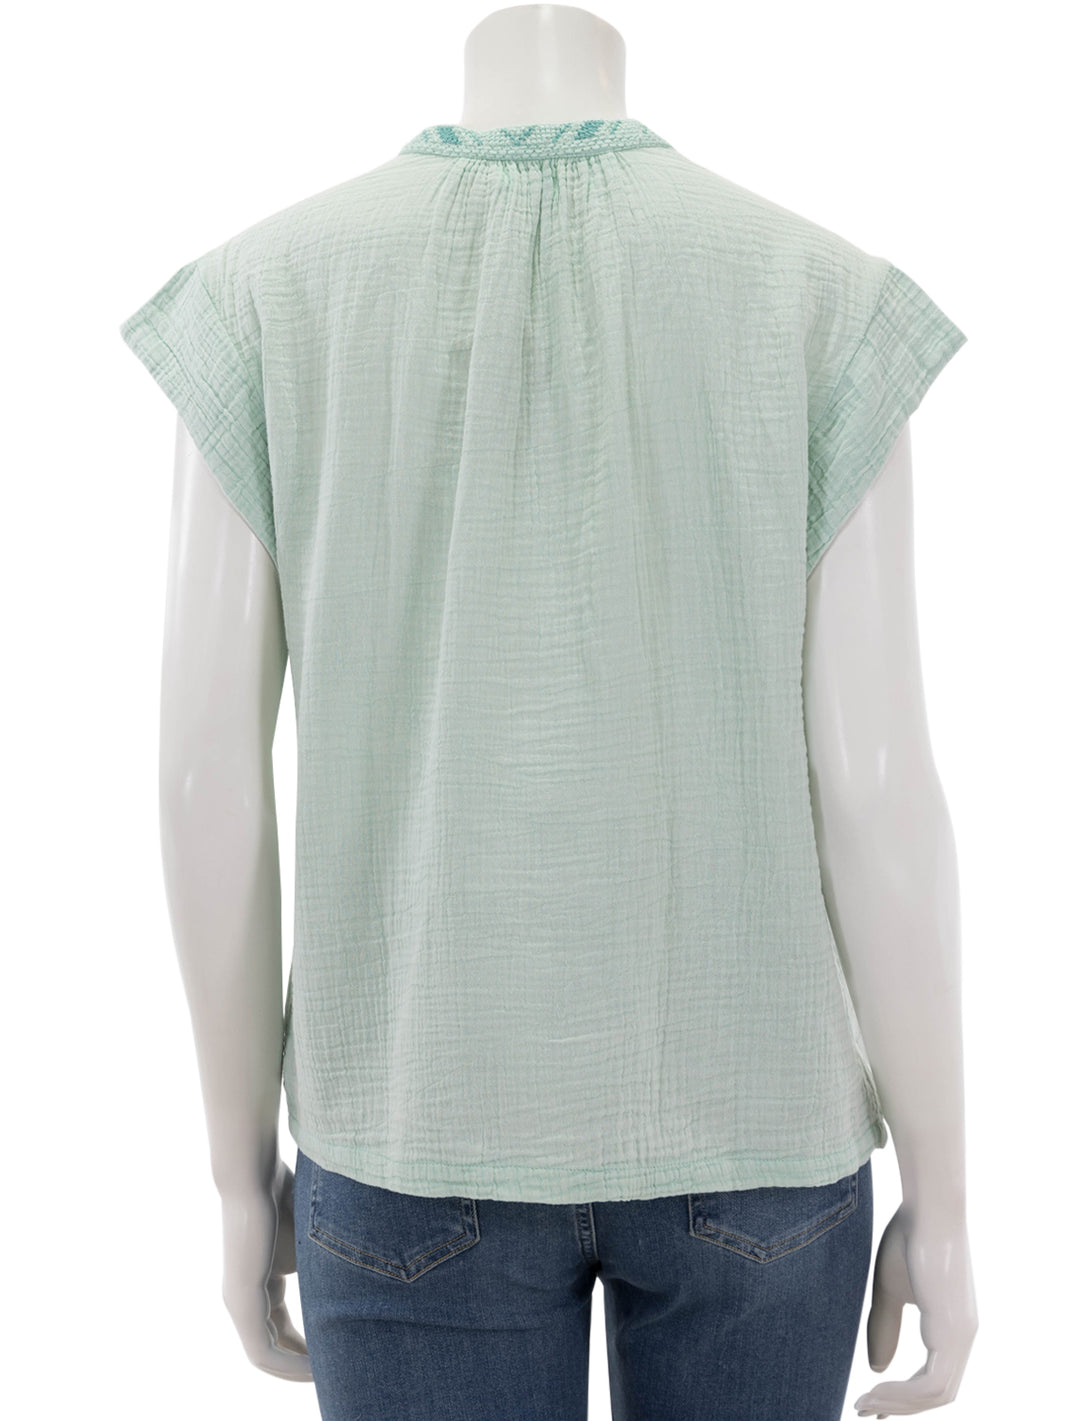 Back view of Faherty's lucia top in surf spray.